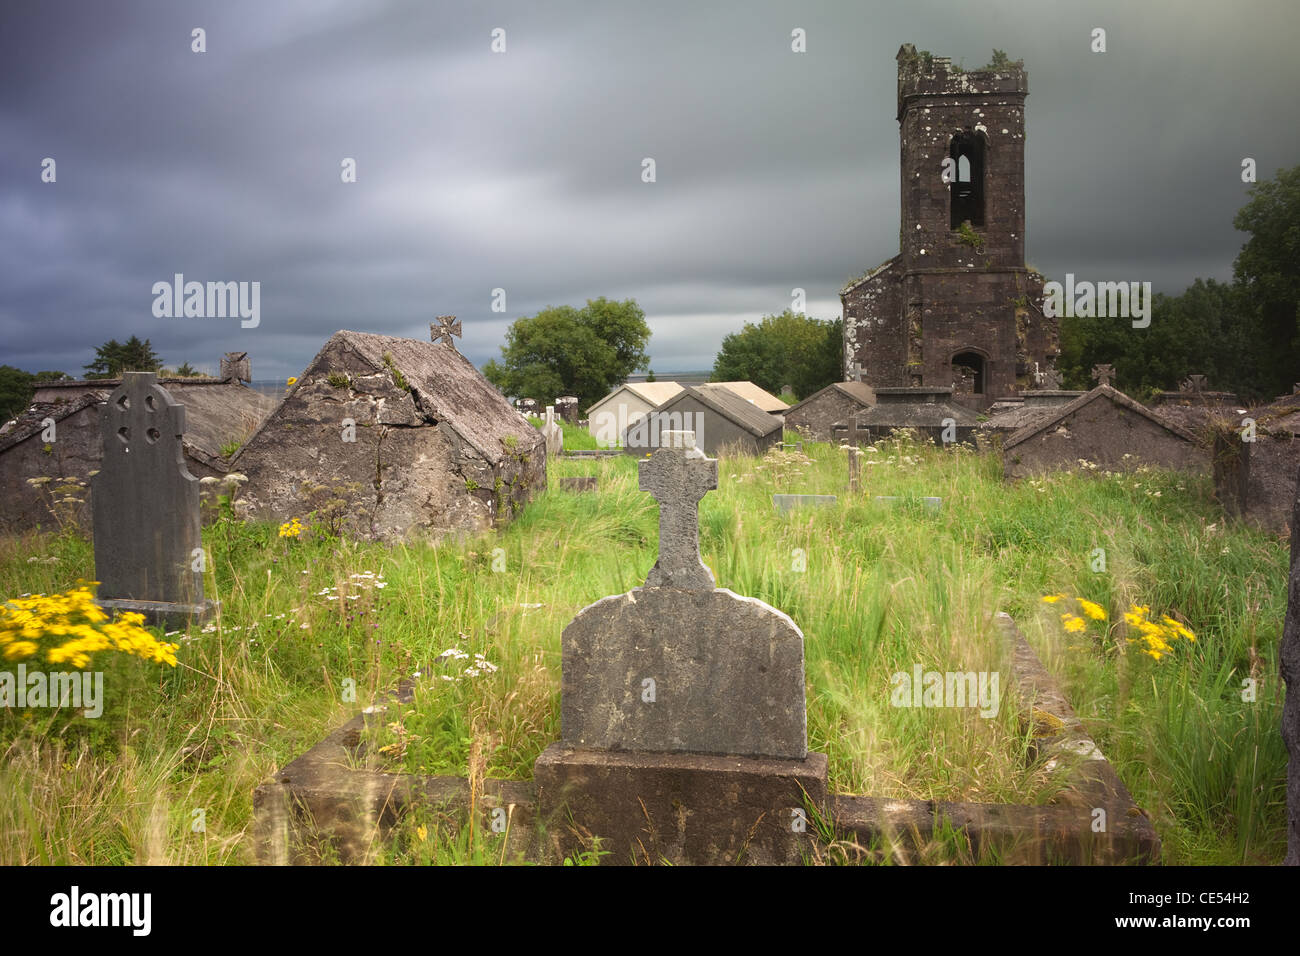 Irish graveyard at Dingle peninsula old ruins of church long exposure gives moody feel caused by blurry vegetation and clouds Stock Photo